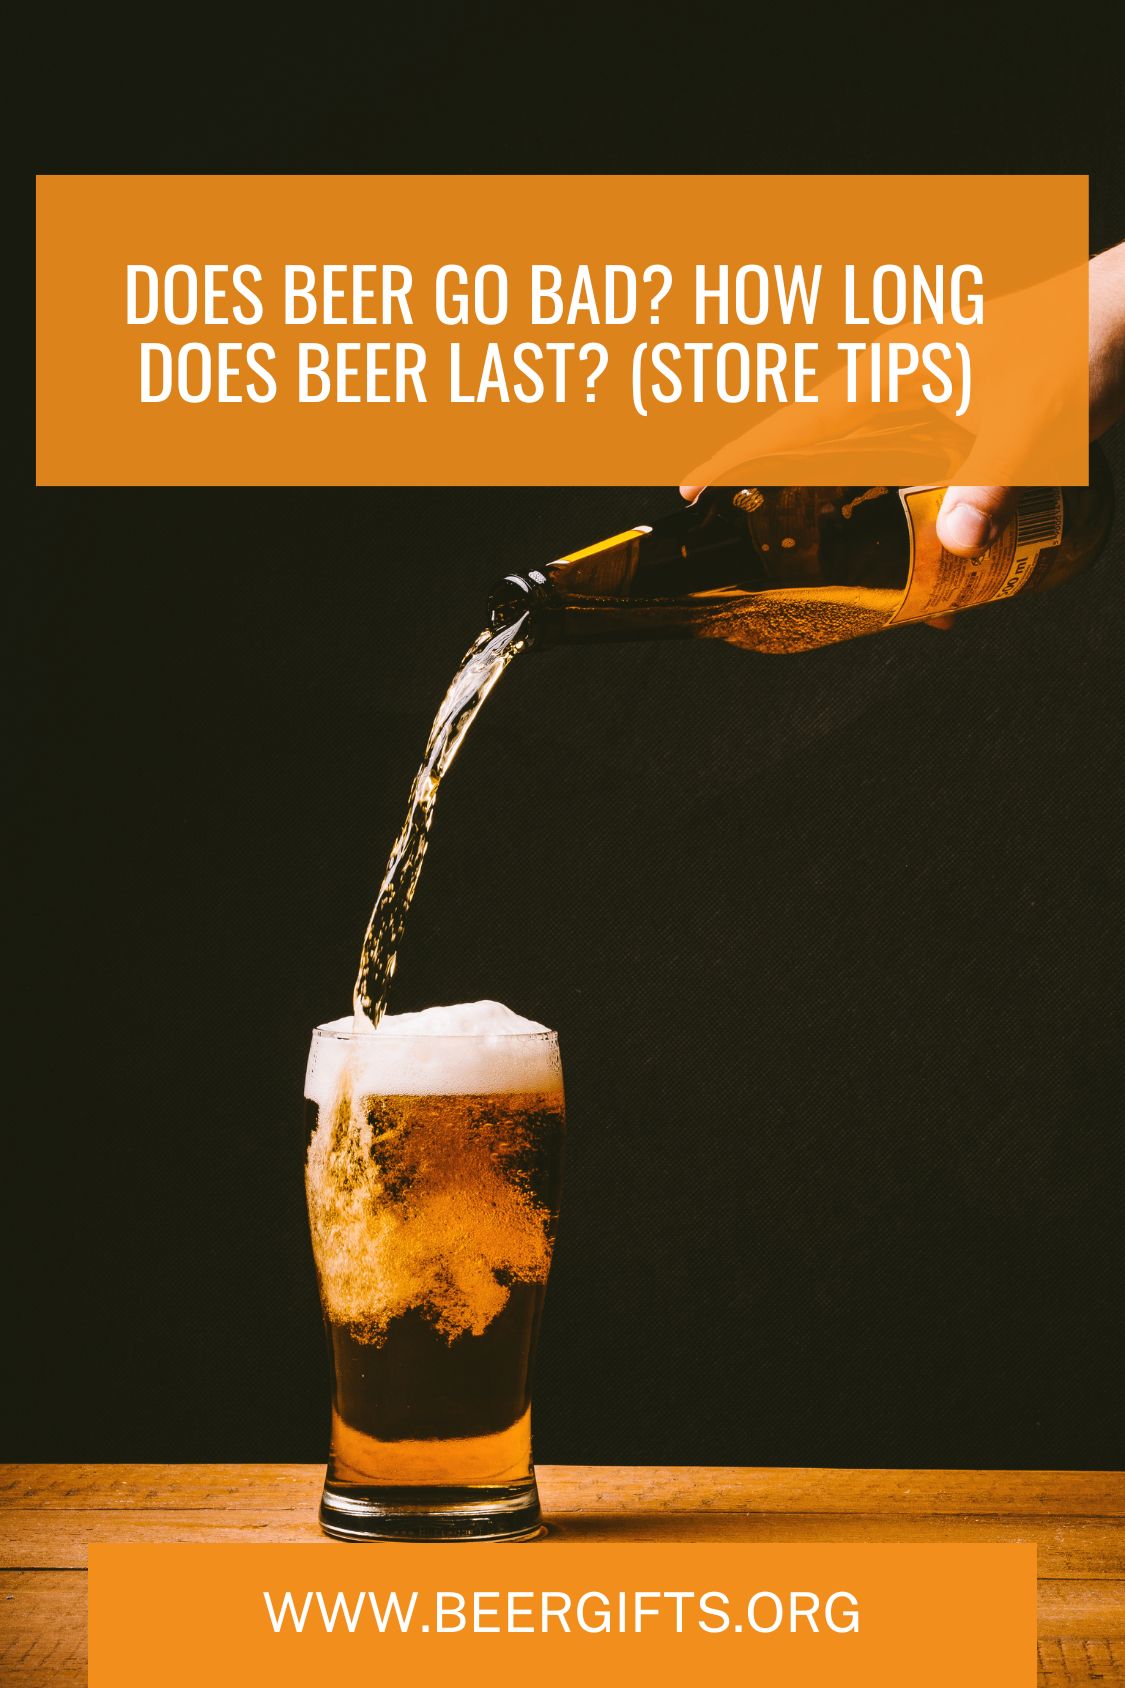 Does Beer Go Bad? How Long Does Beer Last? (Store Tips)